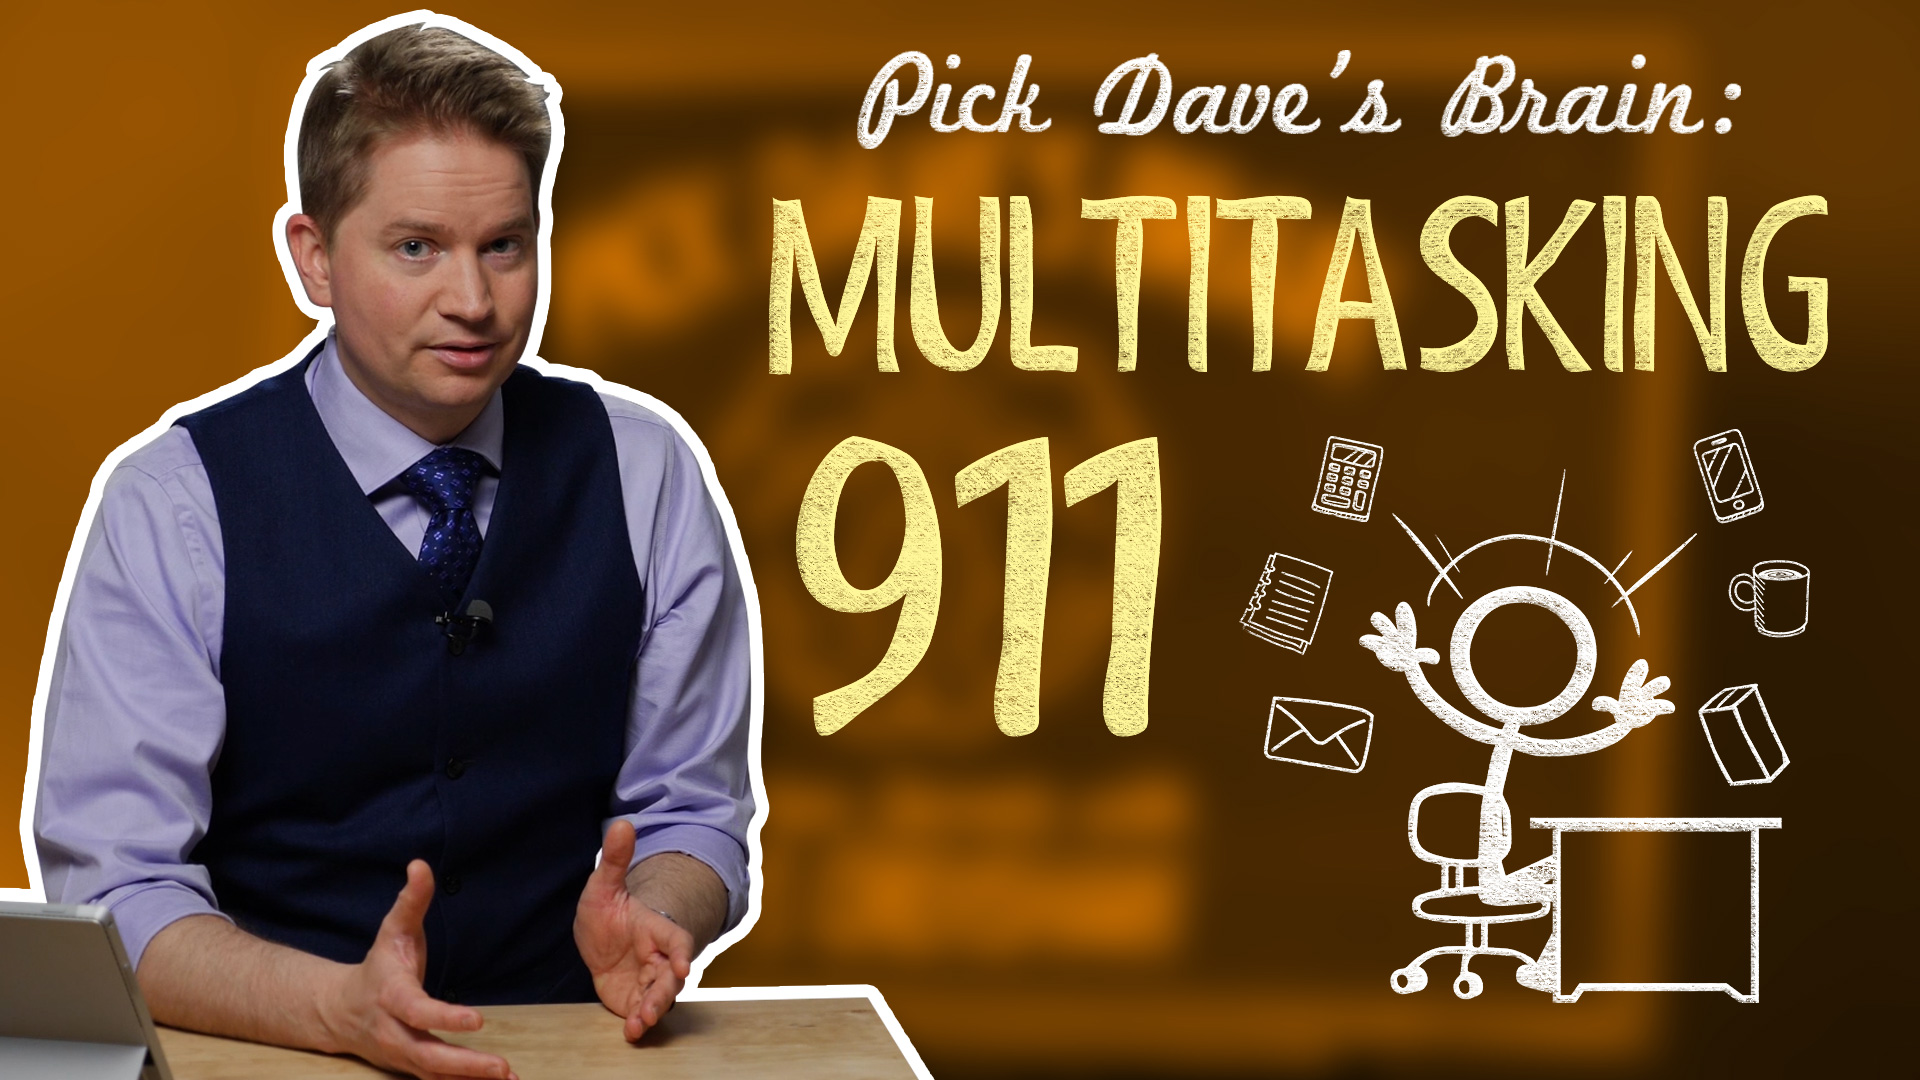 What to do when ‘multitasking’ is unavoidable – Pick Dave’s Brain